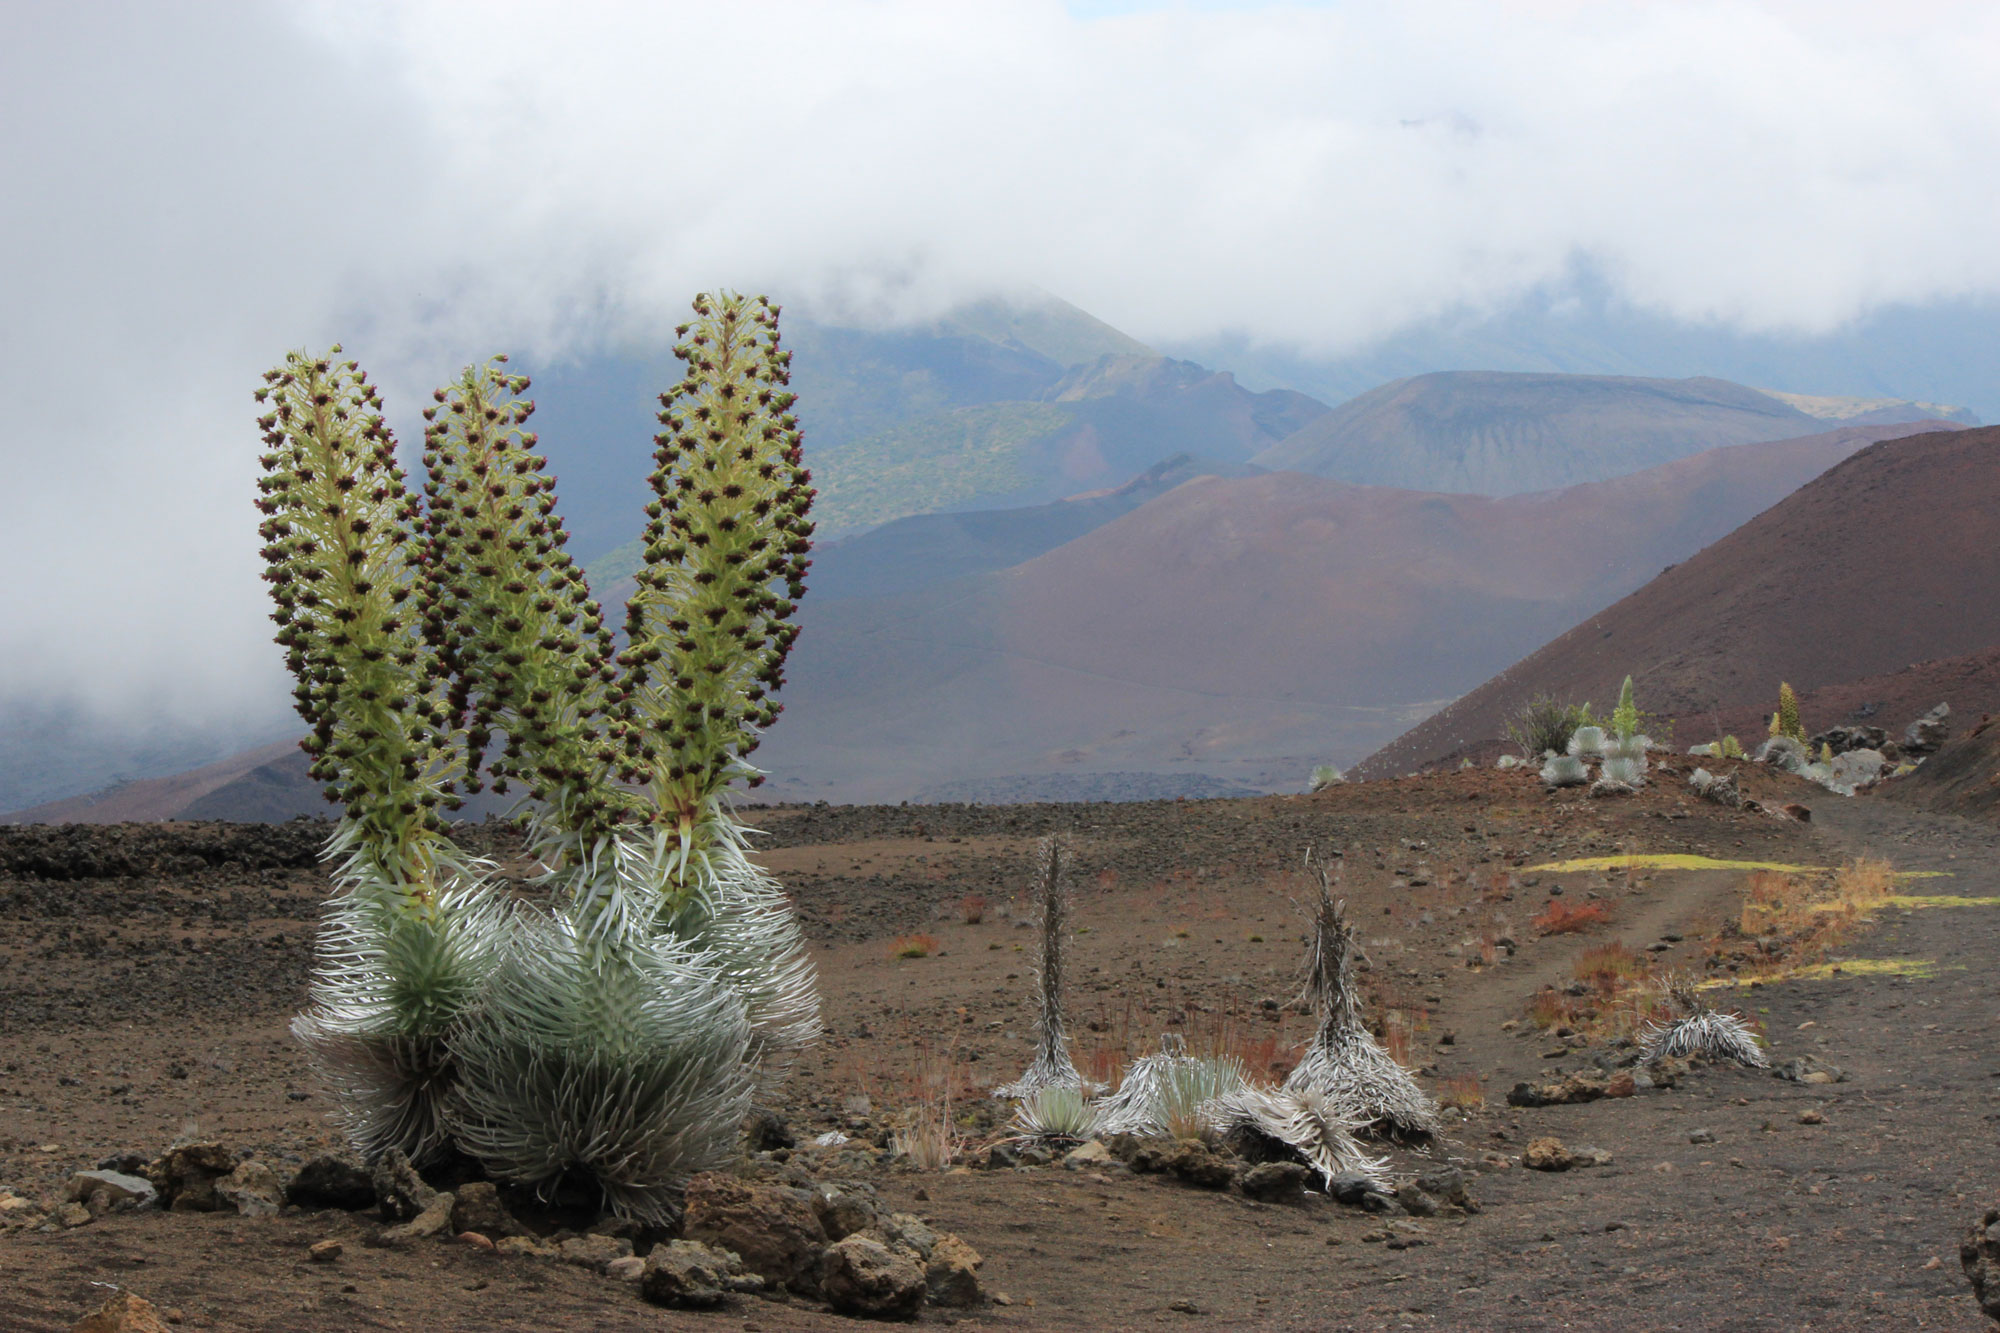 Photograph of silversword plants growing in a barren landscape with mountains in the background. Each silversword has a cluster of silvery-green, lanceolate leaves at its base from which a stalk of large, nodding flowers emerges.